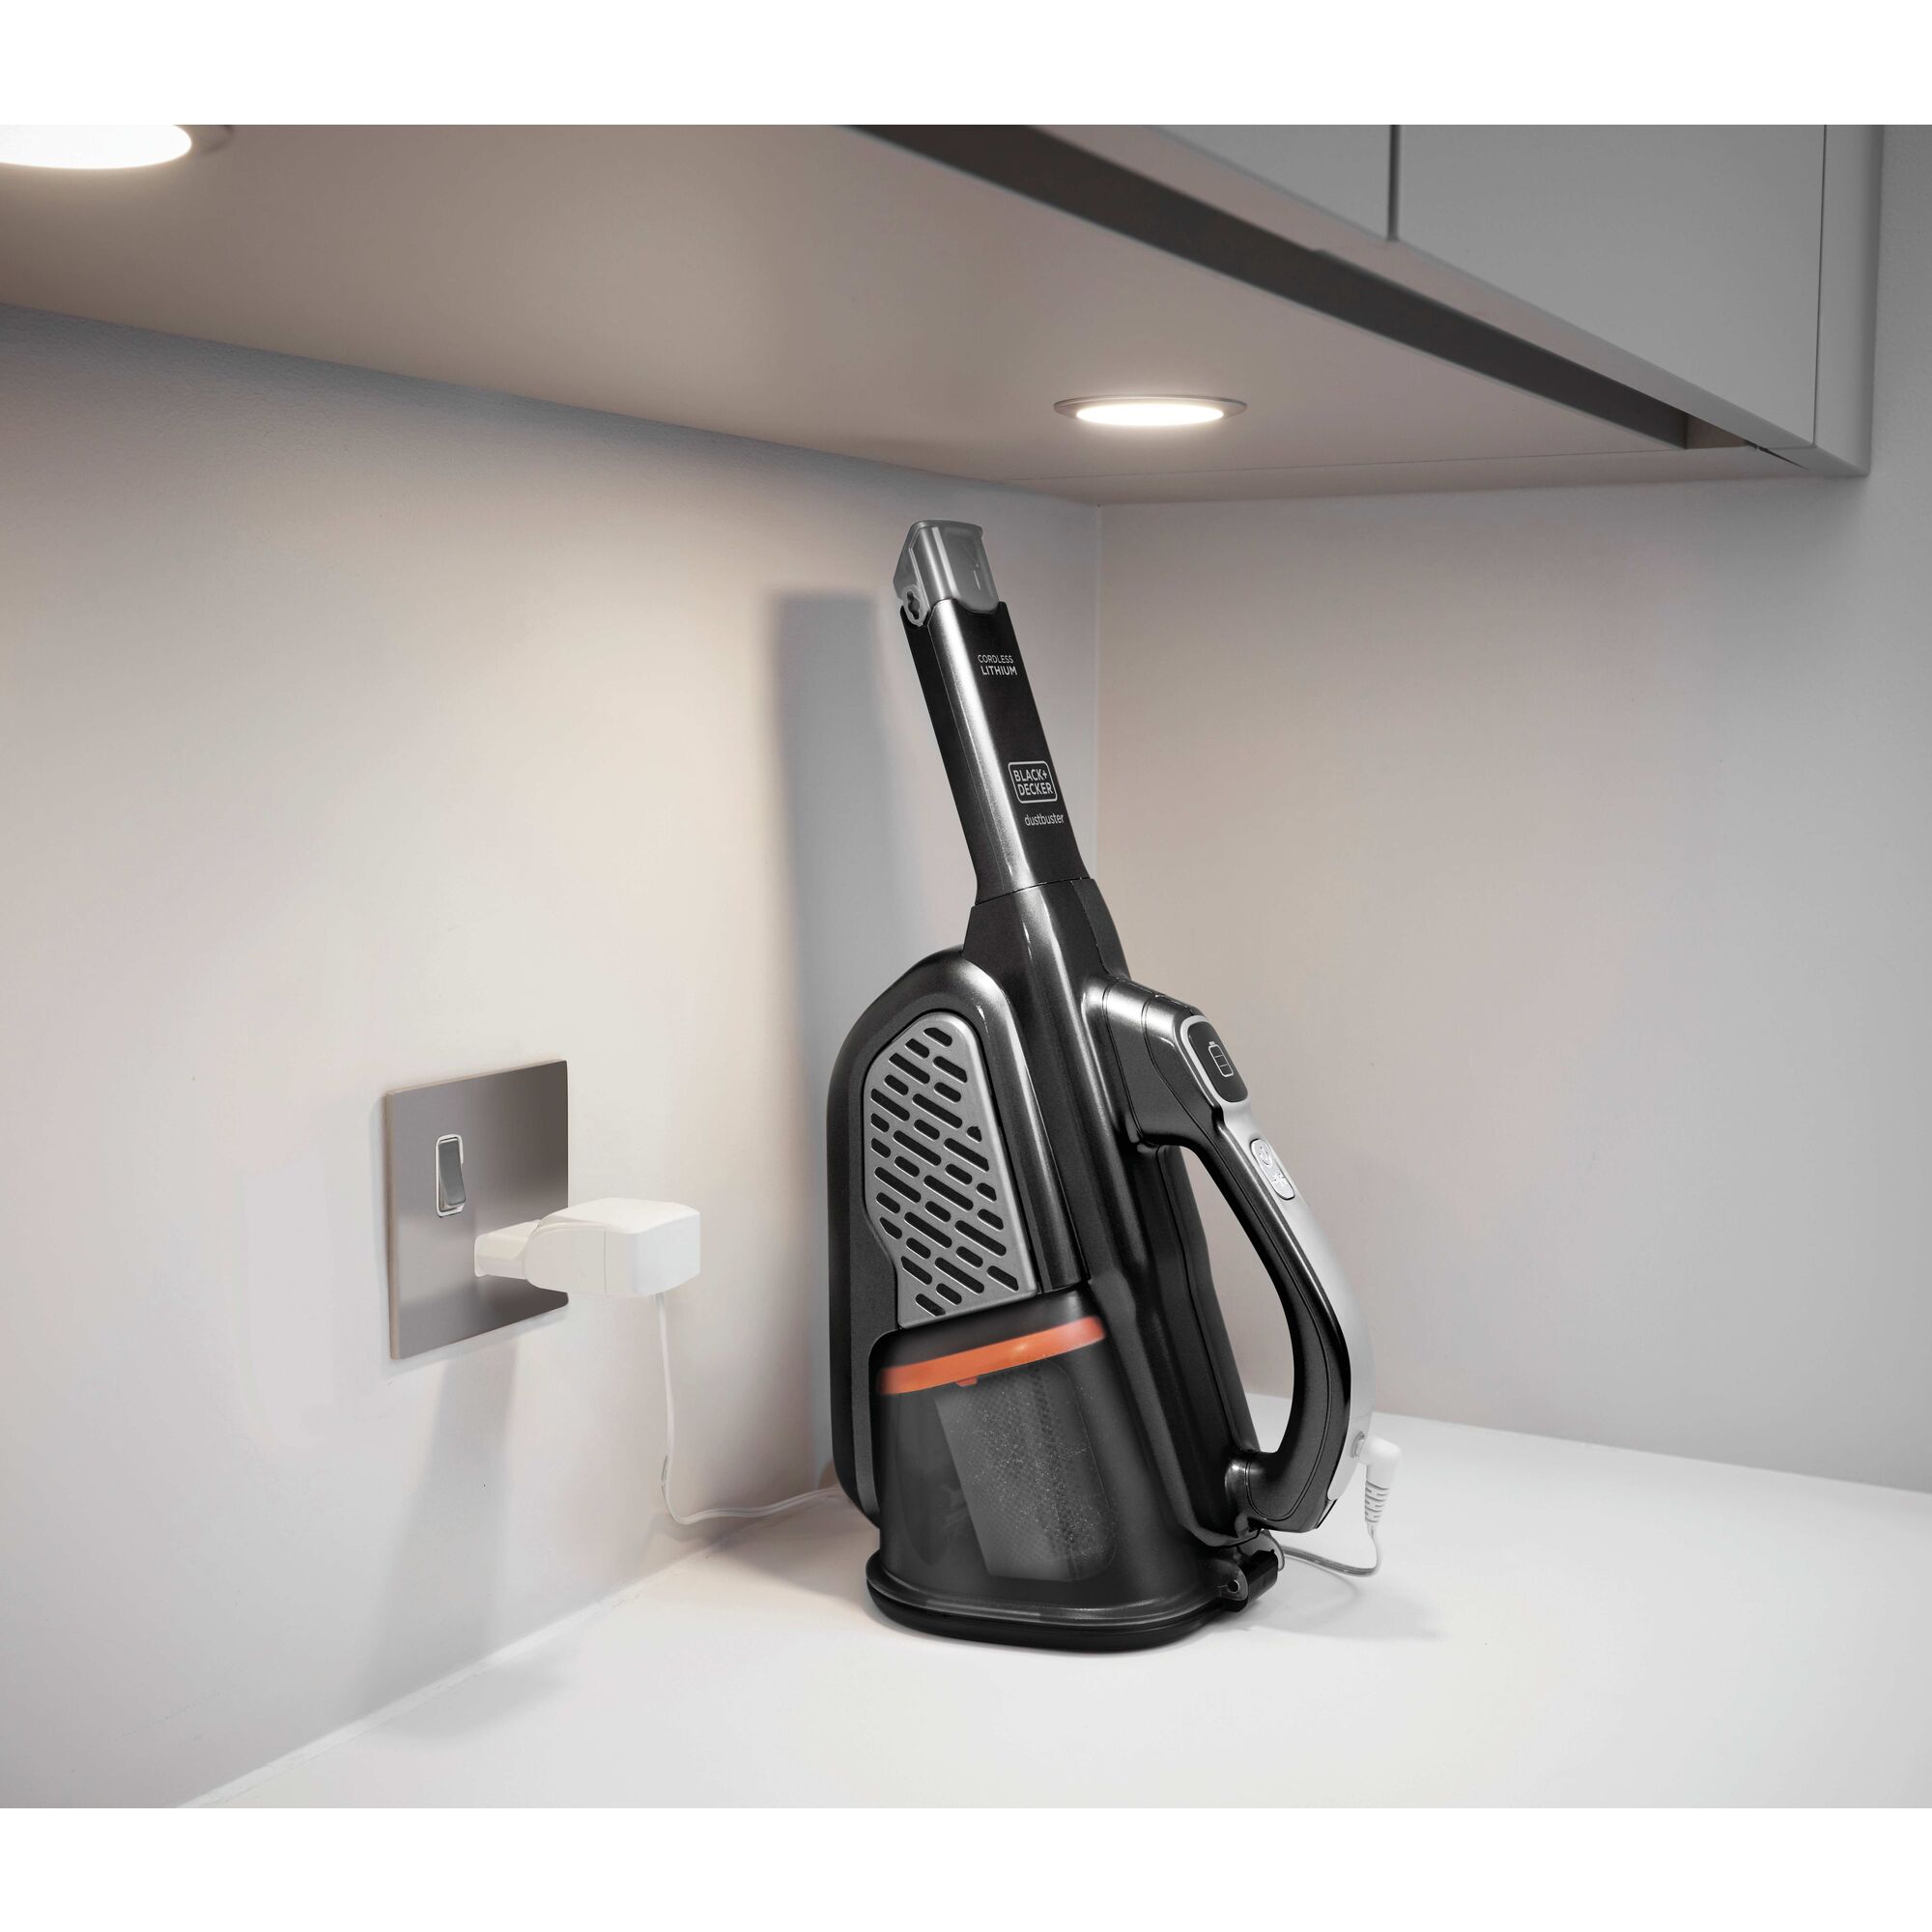 Jack plug charger feature in 20 volt dustbuster advanced clean cordless hand vacuum.